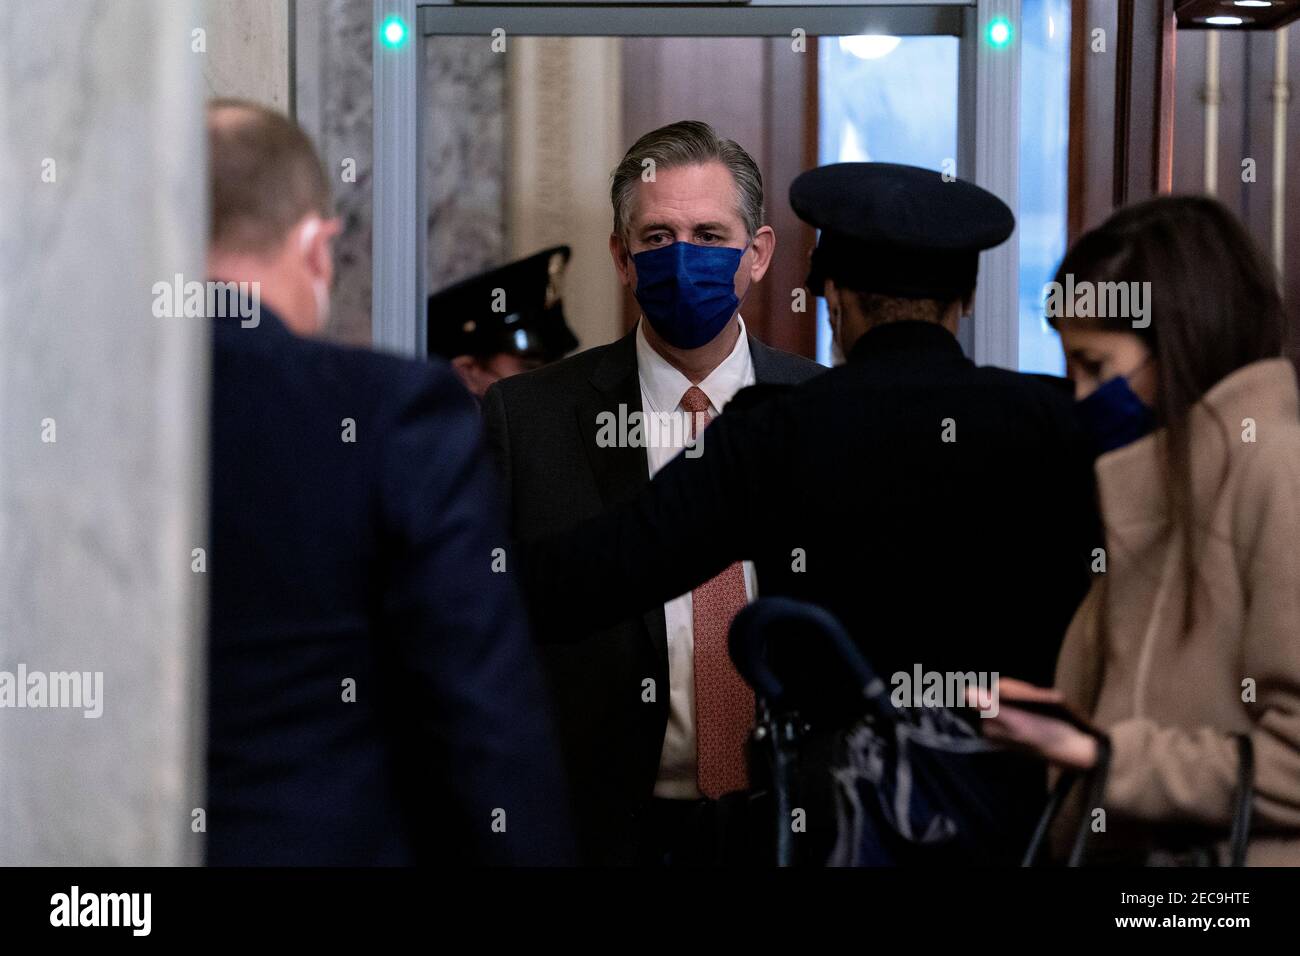 Washington, DC, USA. 13th Feb, 2021. Bruce Castor, defense attorney for Donald Trump, center, goes through security while arriving to the U.S. Capitol in Washington, DC, U.S., on Saturday, Feb. 13, 2021. The Senate approved 55-45 a request to consider calling witnesses in the second impeachment trial of Donald Trump, a move that may extend the trial that was expected to end within hours. Credit: Stefani Reynolds - Pool via CNP | usage worldwide Credit: dpa/Alamy Live News Stock Photo